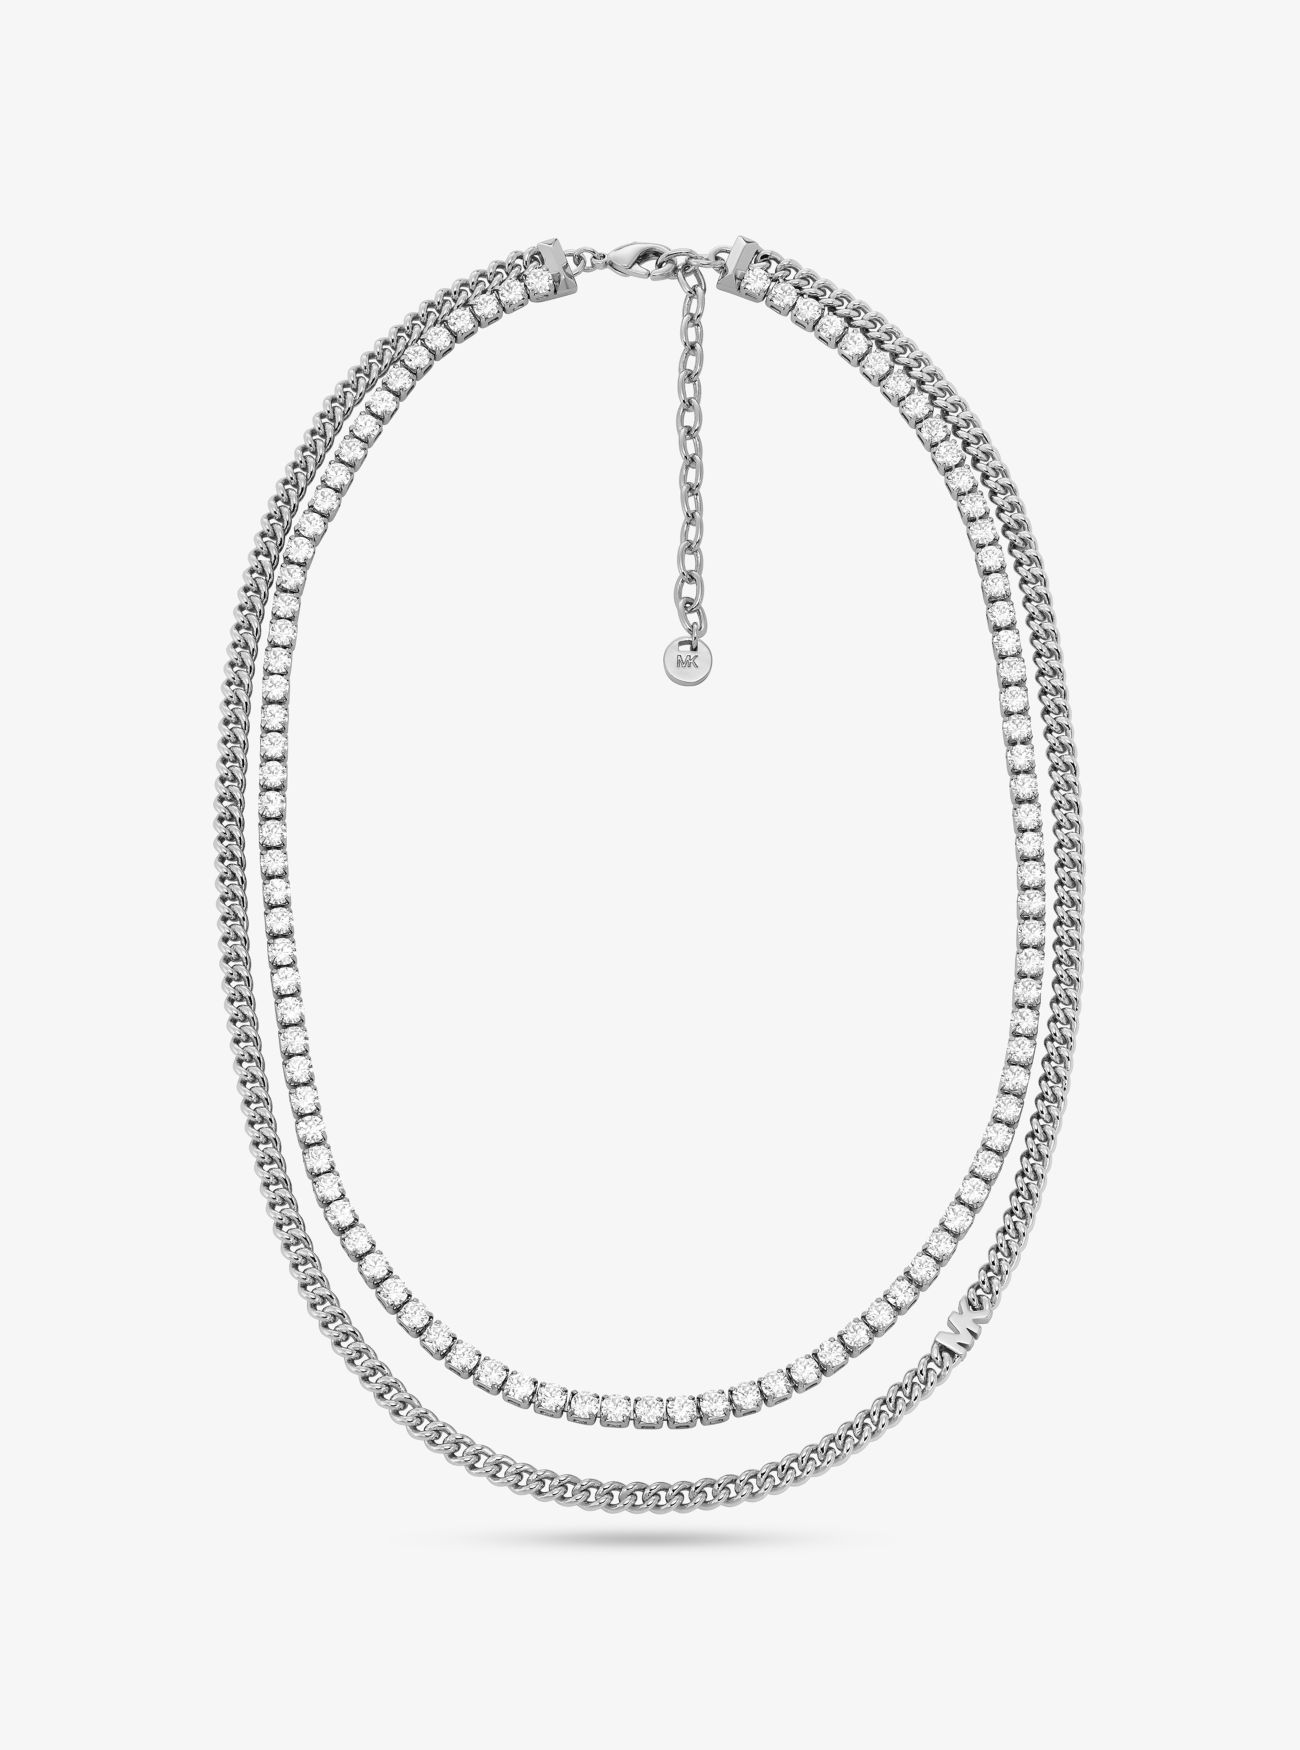 MK Precious Metal-Plated Brass Double Chain Tennis Necklace - Silver - Michael Kors